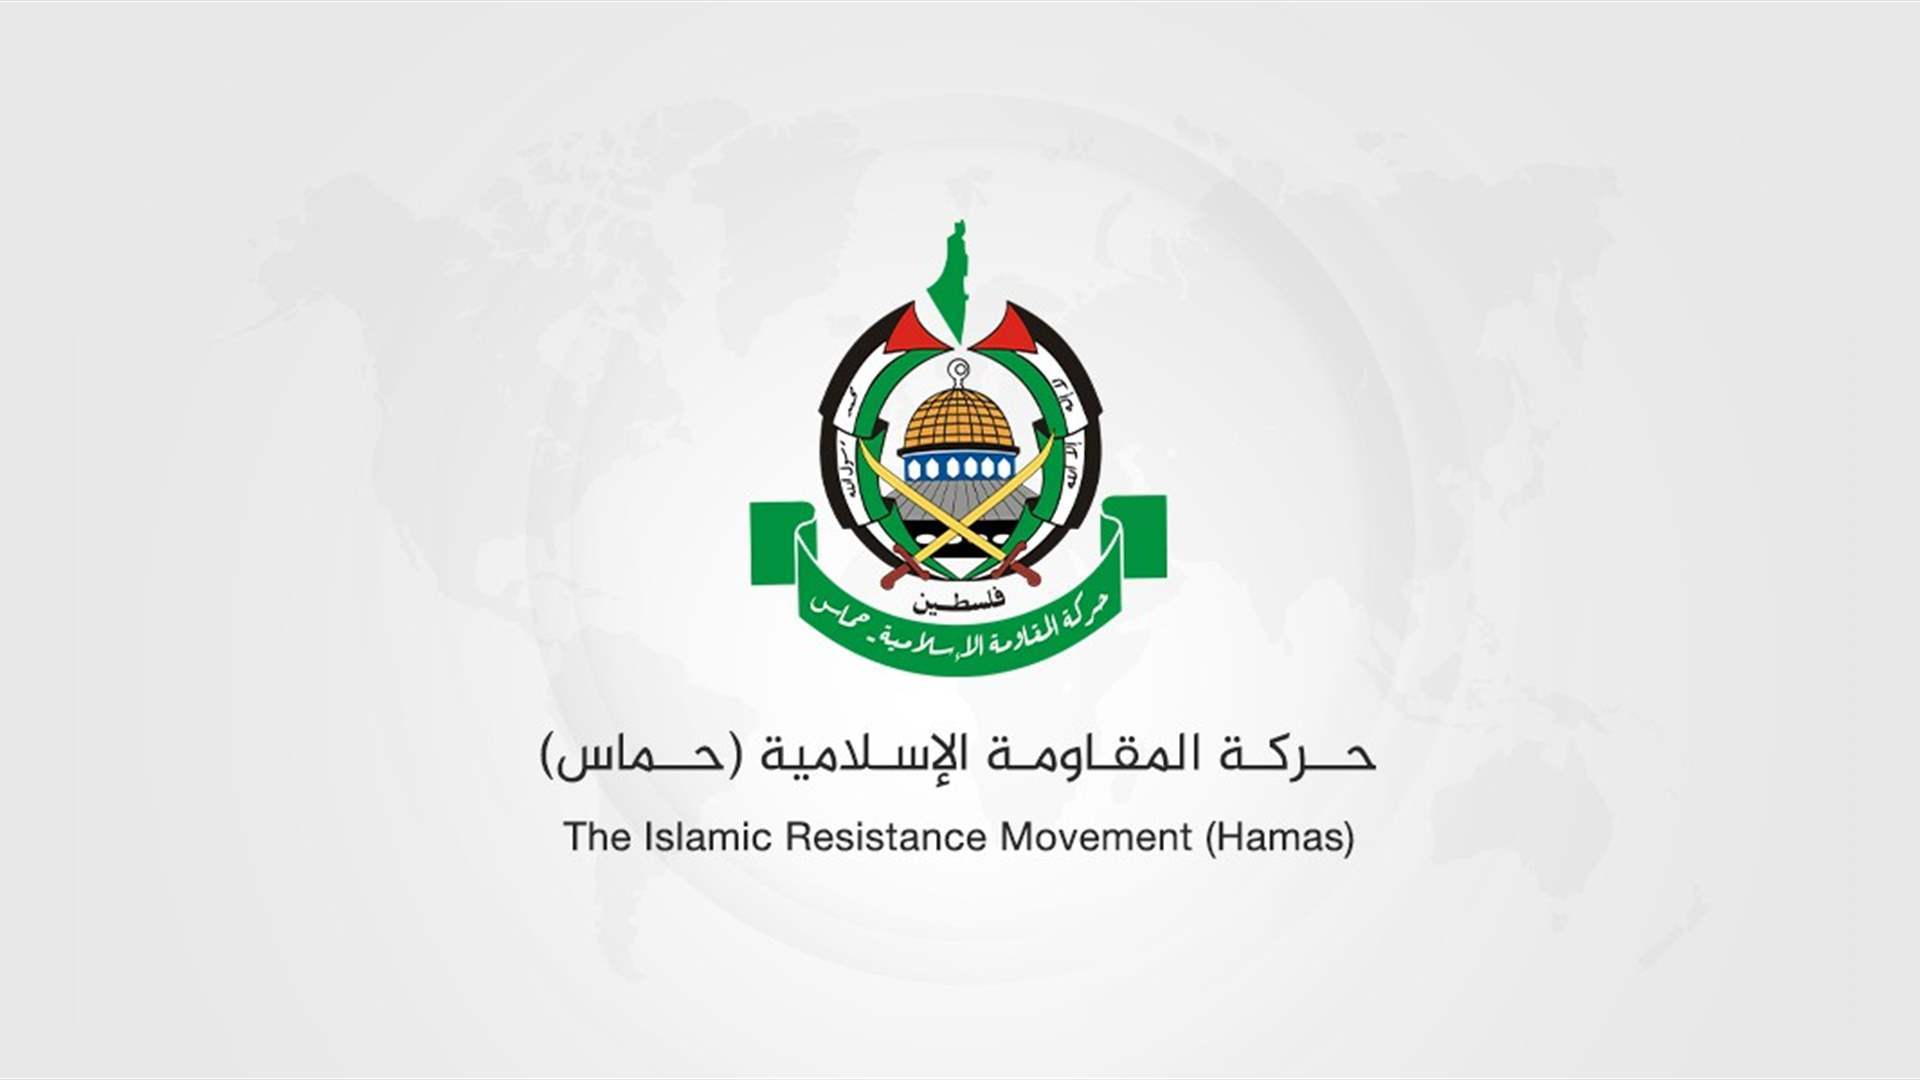 Hamas Movement calls for general mobilization and confrontation of the occupation in all locations